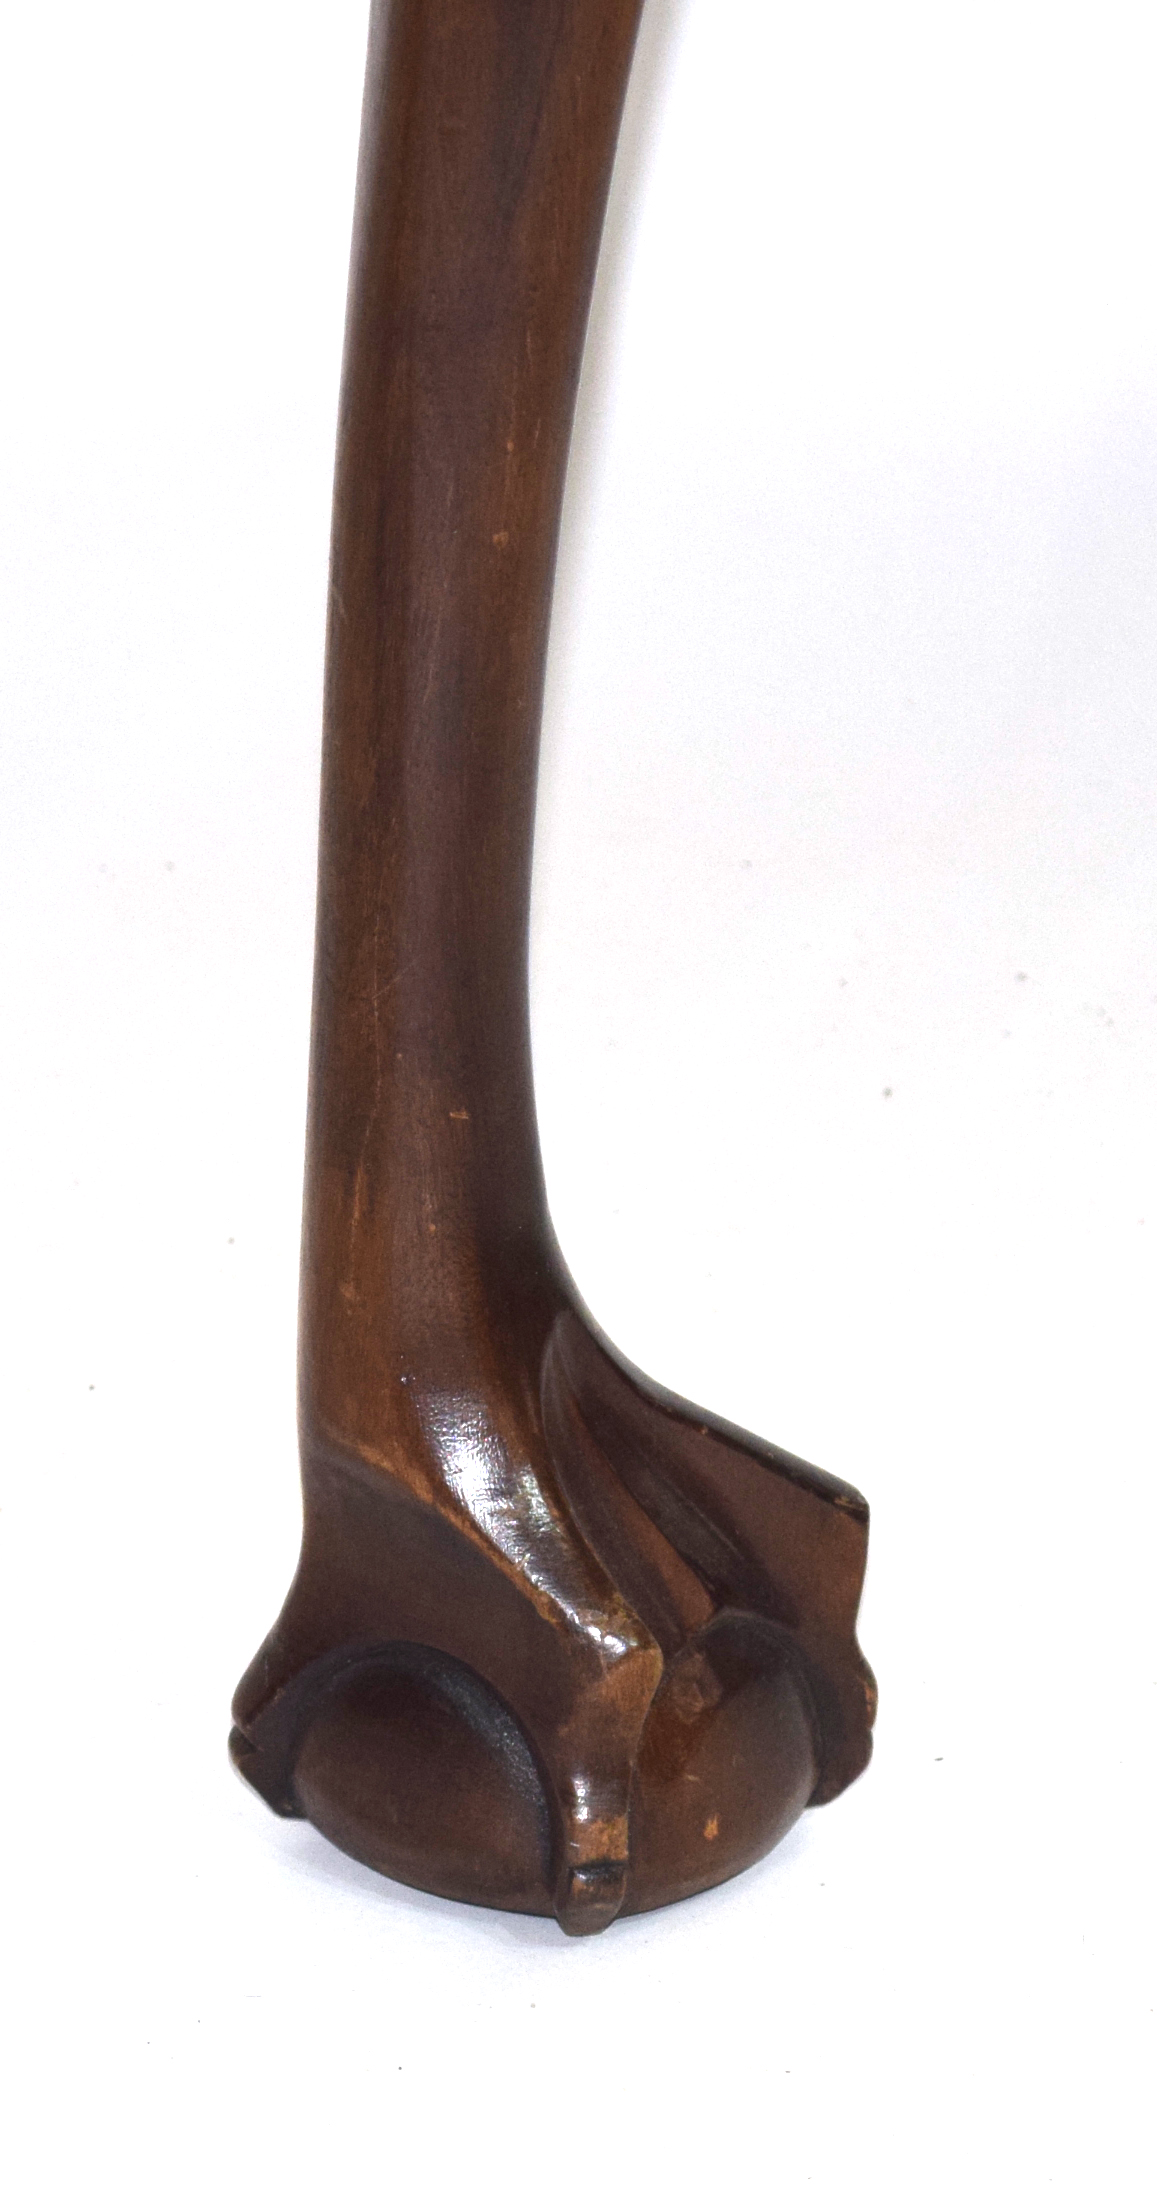 Edwardian mahogany demi-lune side table raised on three cabriole legs with ball and claw feet - Image 5 of 7